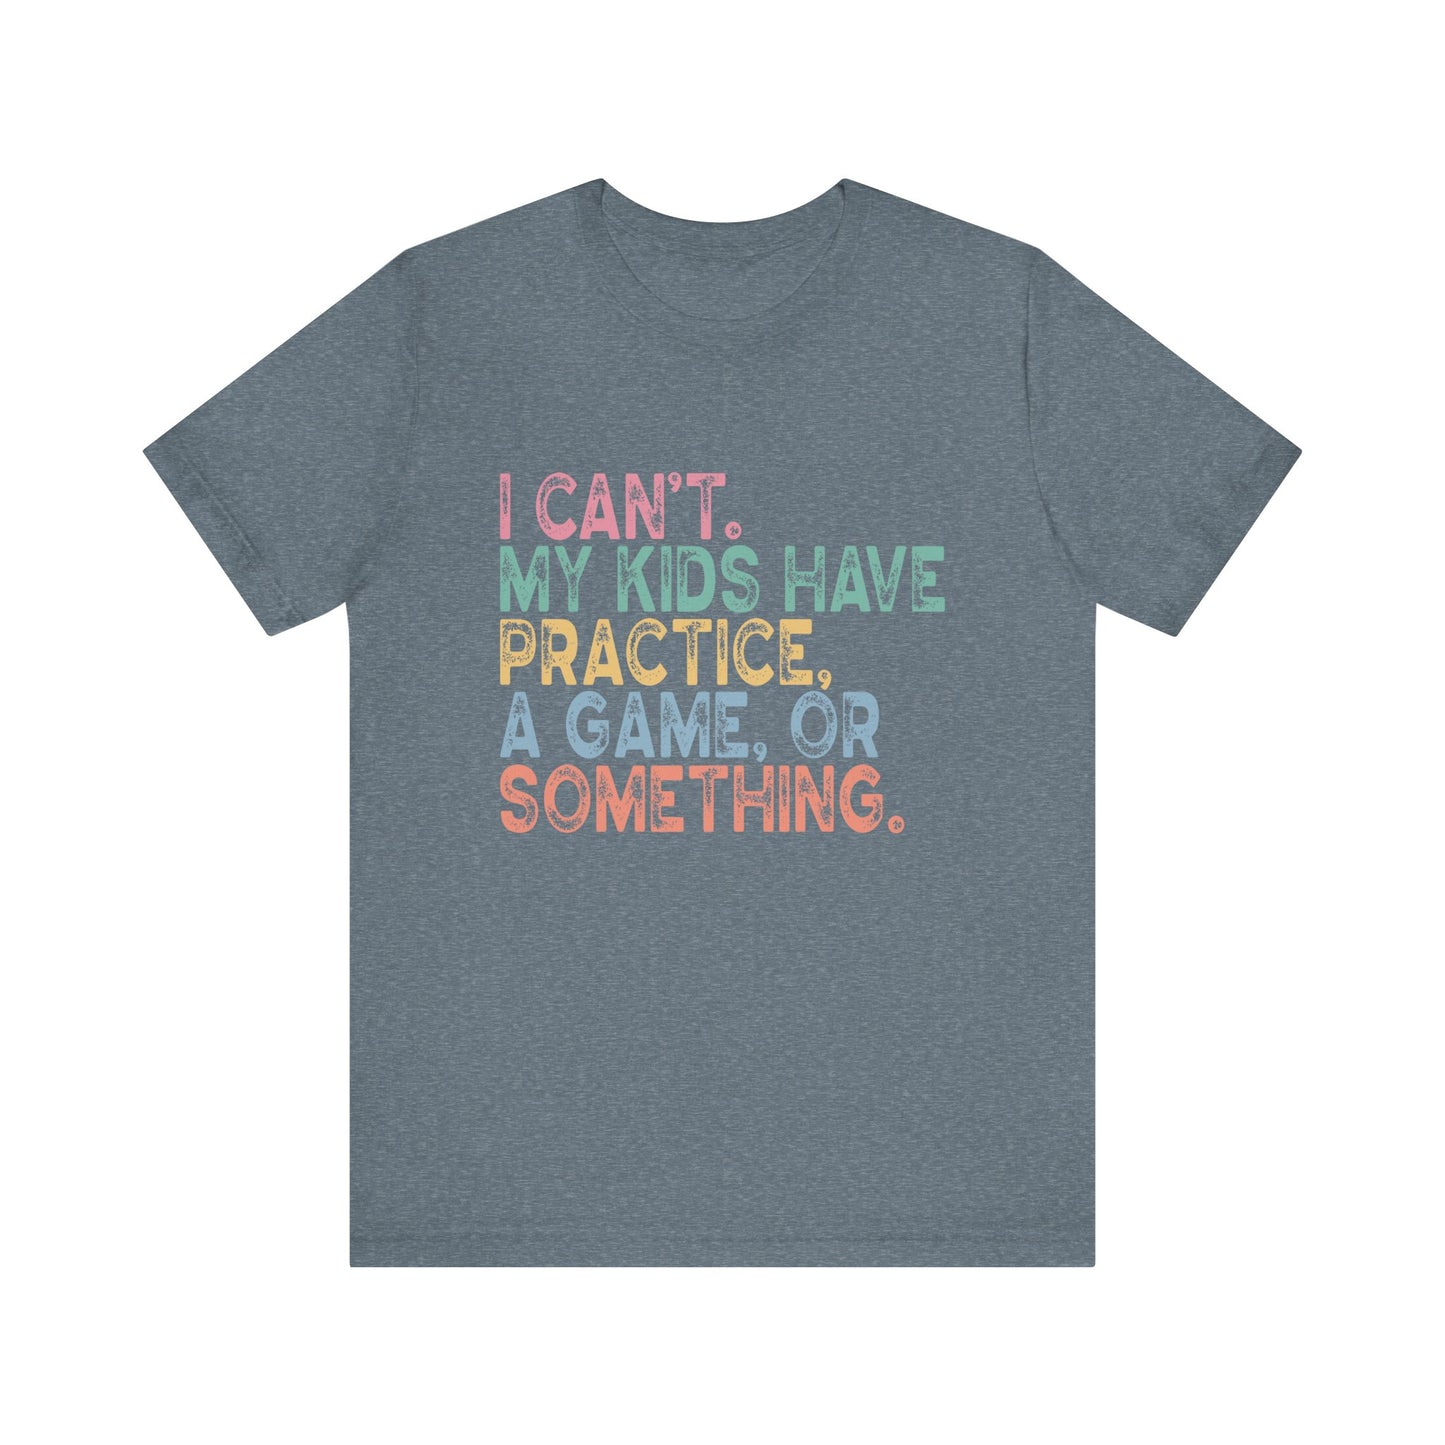 Can't my kids have practice a game or something women's funny Short Sleeve Shirt for mom